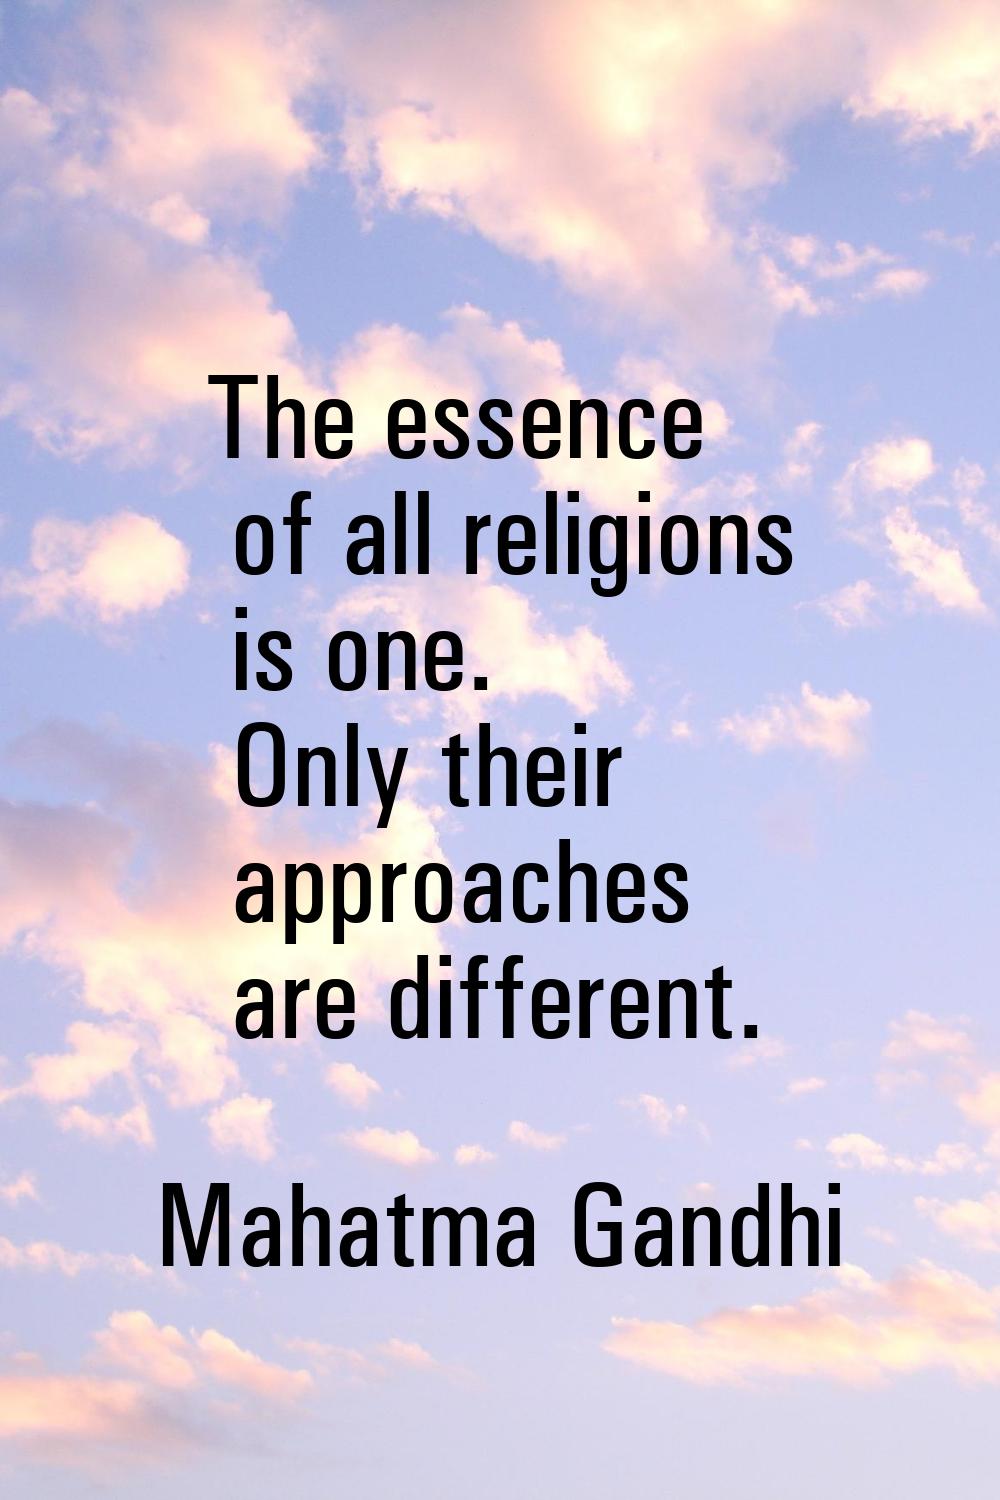 The essence of all religions is one. Only their approaches are different.